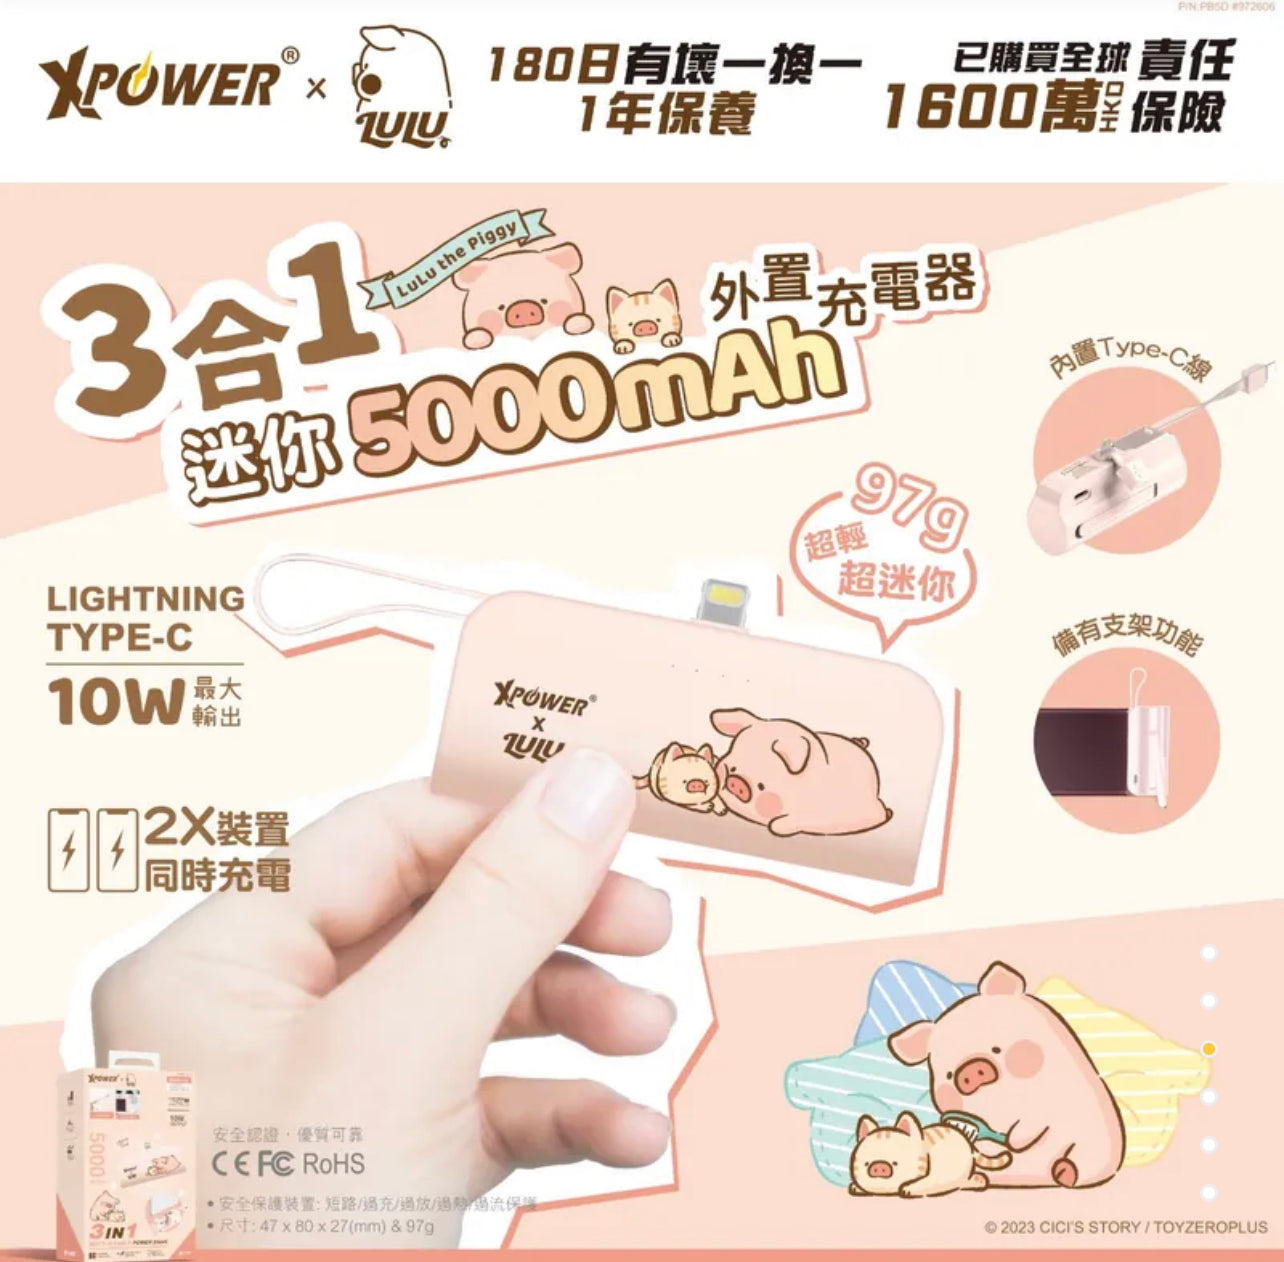 XPower x Lulu the piggy🐷3 in 1 Mini 5000mAh Built-in Lightning Cable Power Bank